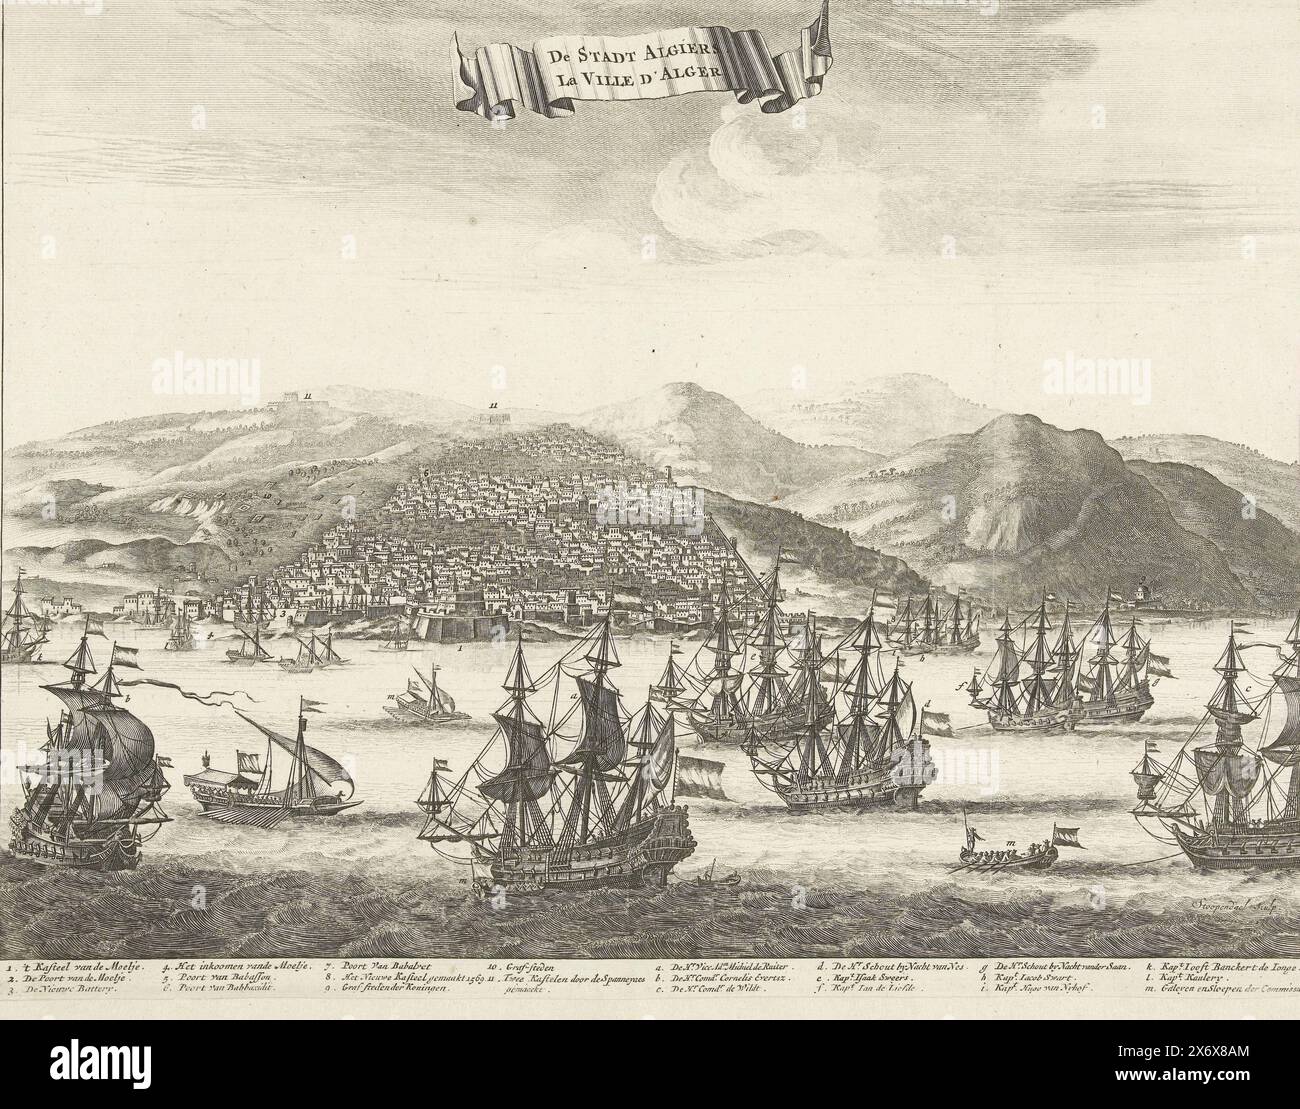 The Dutch fleet under Michiel de Ruyter in front of the city of Algiers, 1662, De Stadt Algiers, La Ville D'Alger (title on object), View of Algiers with the Dutch fleet under Admiral Michiel de Ruyter anchored near the city at the time of the peace negotiations, November 16, 1662. Marked at the top right: Page. 254. In the caption the legend 1-11 and a-m., print, print maker: Bastiaen Stopendael, (mentioned on object), Northern Netherlands, 1685 - 1687, paper, etching, height, 267 mm × width, 350 mm Stock Photo